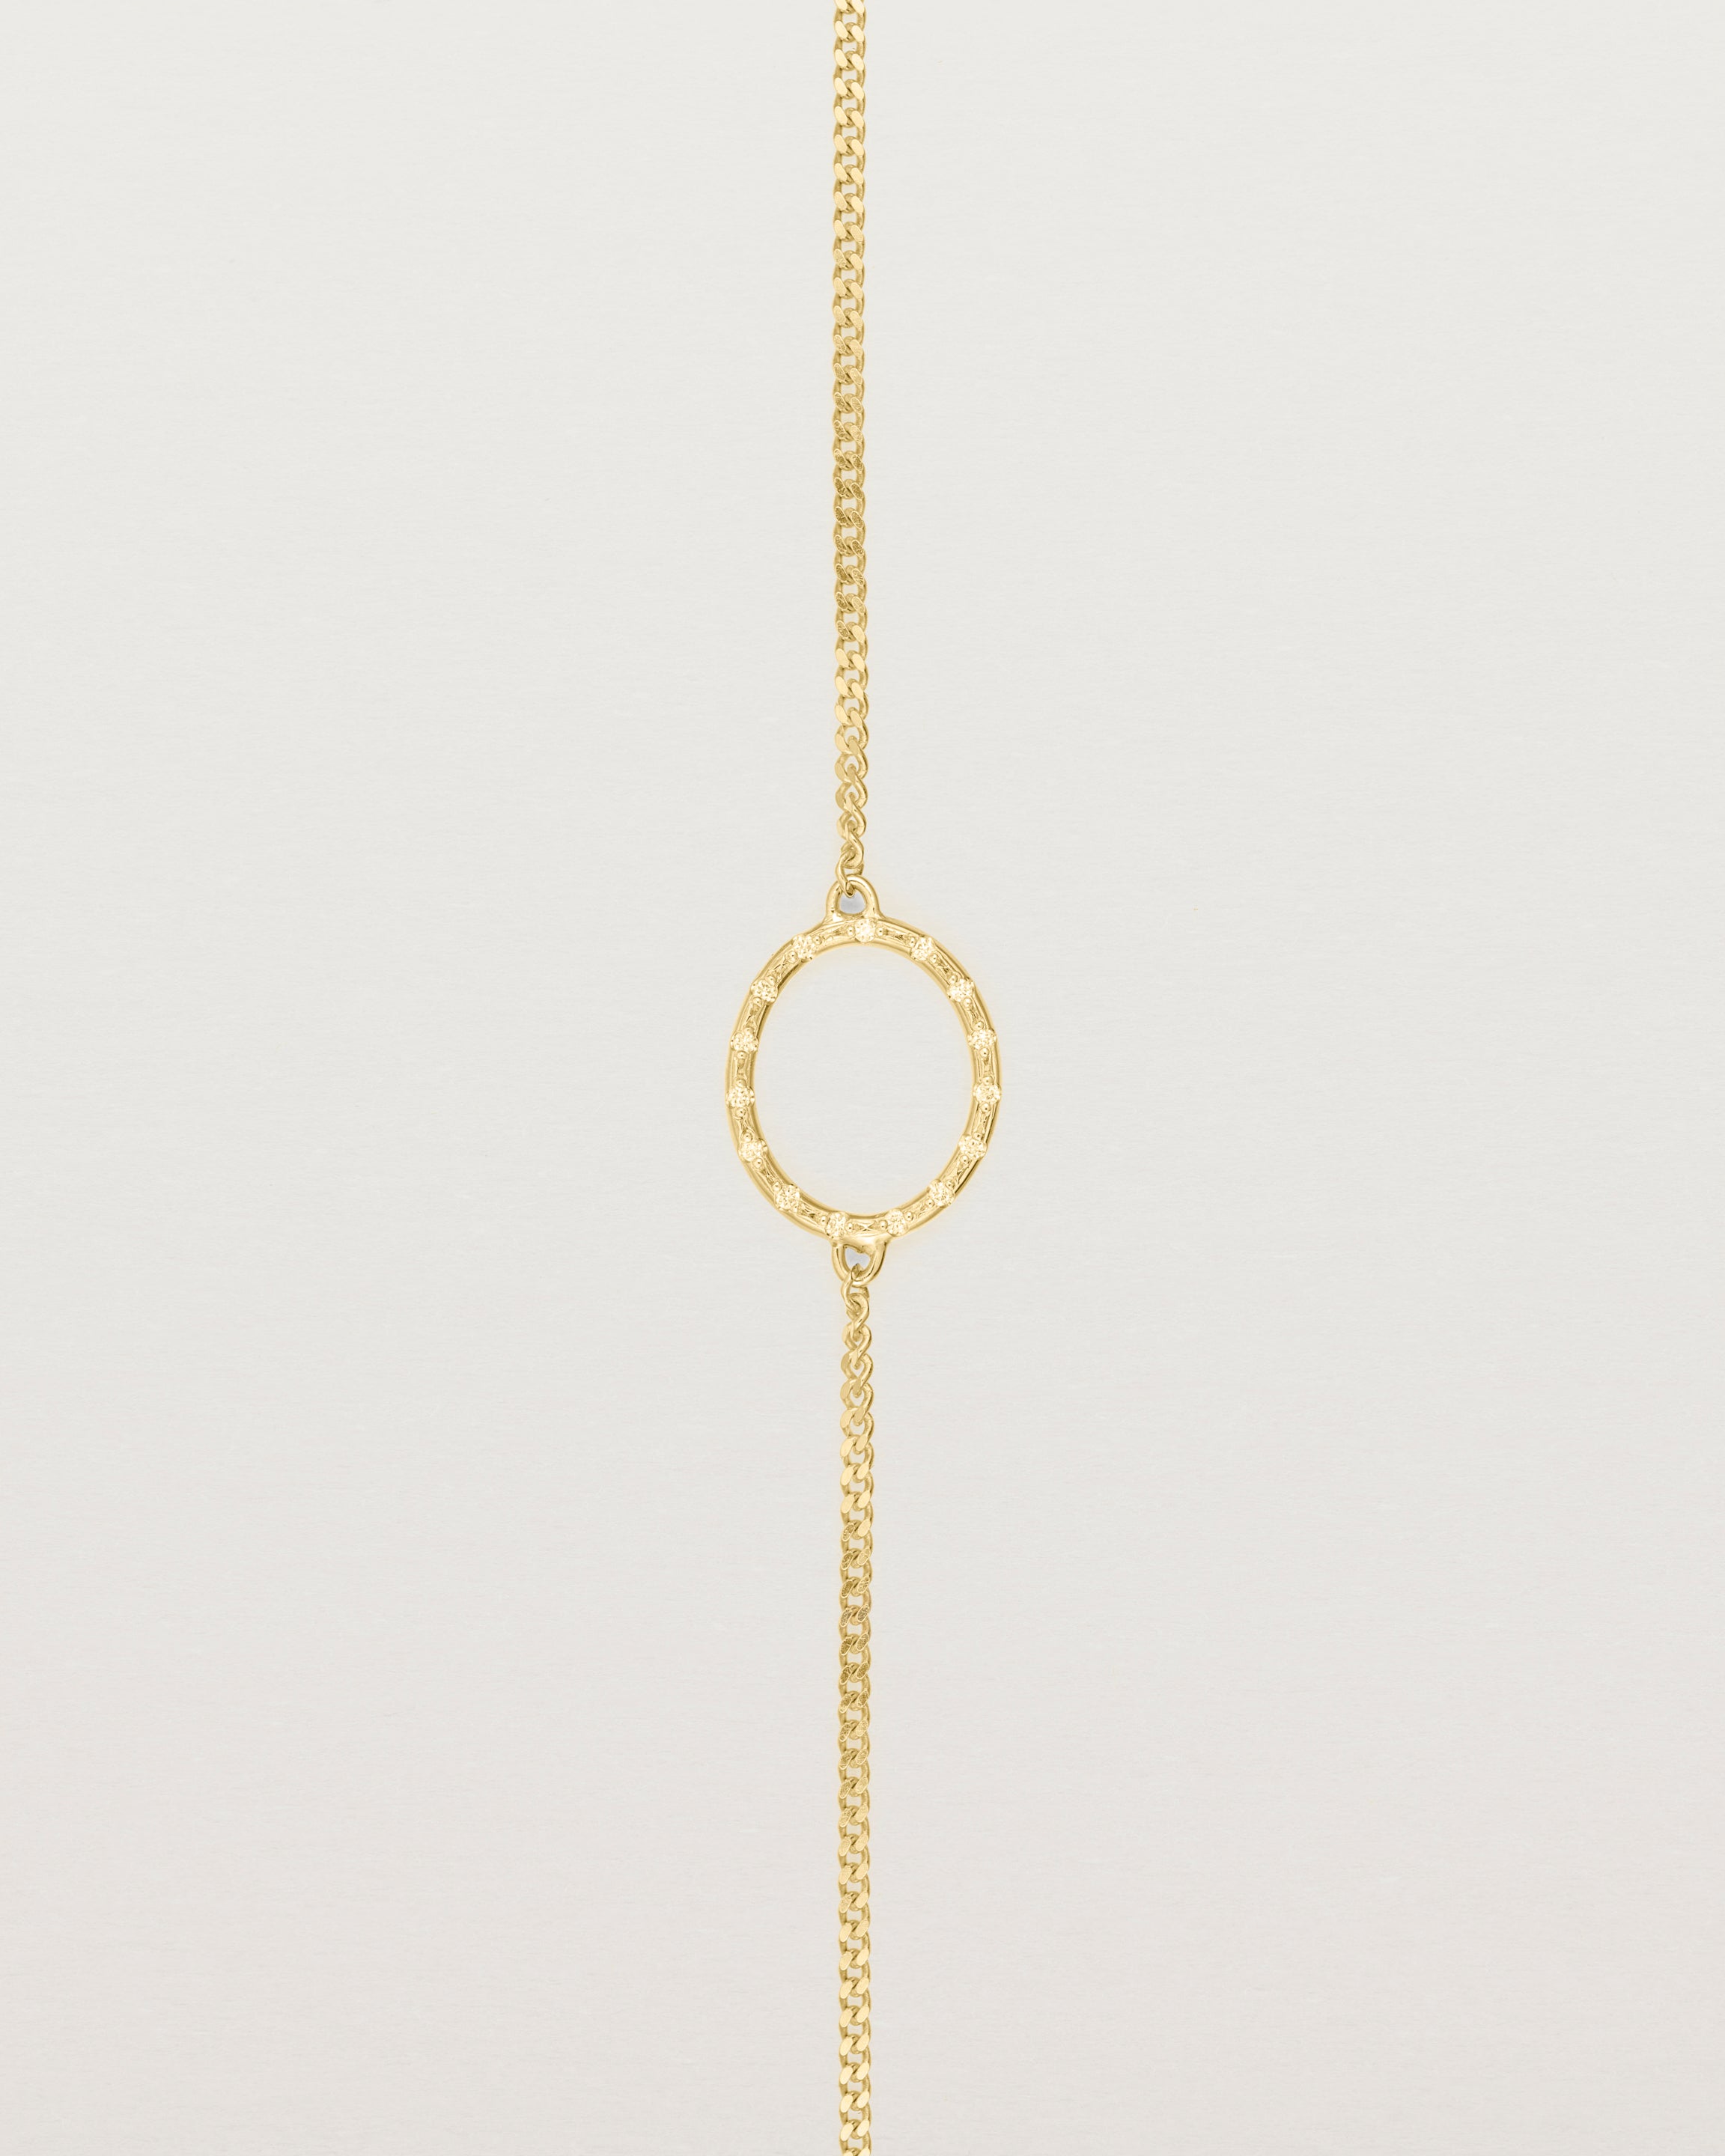 A white gold chain bracelet featuring a gold circle set with small white diamonds